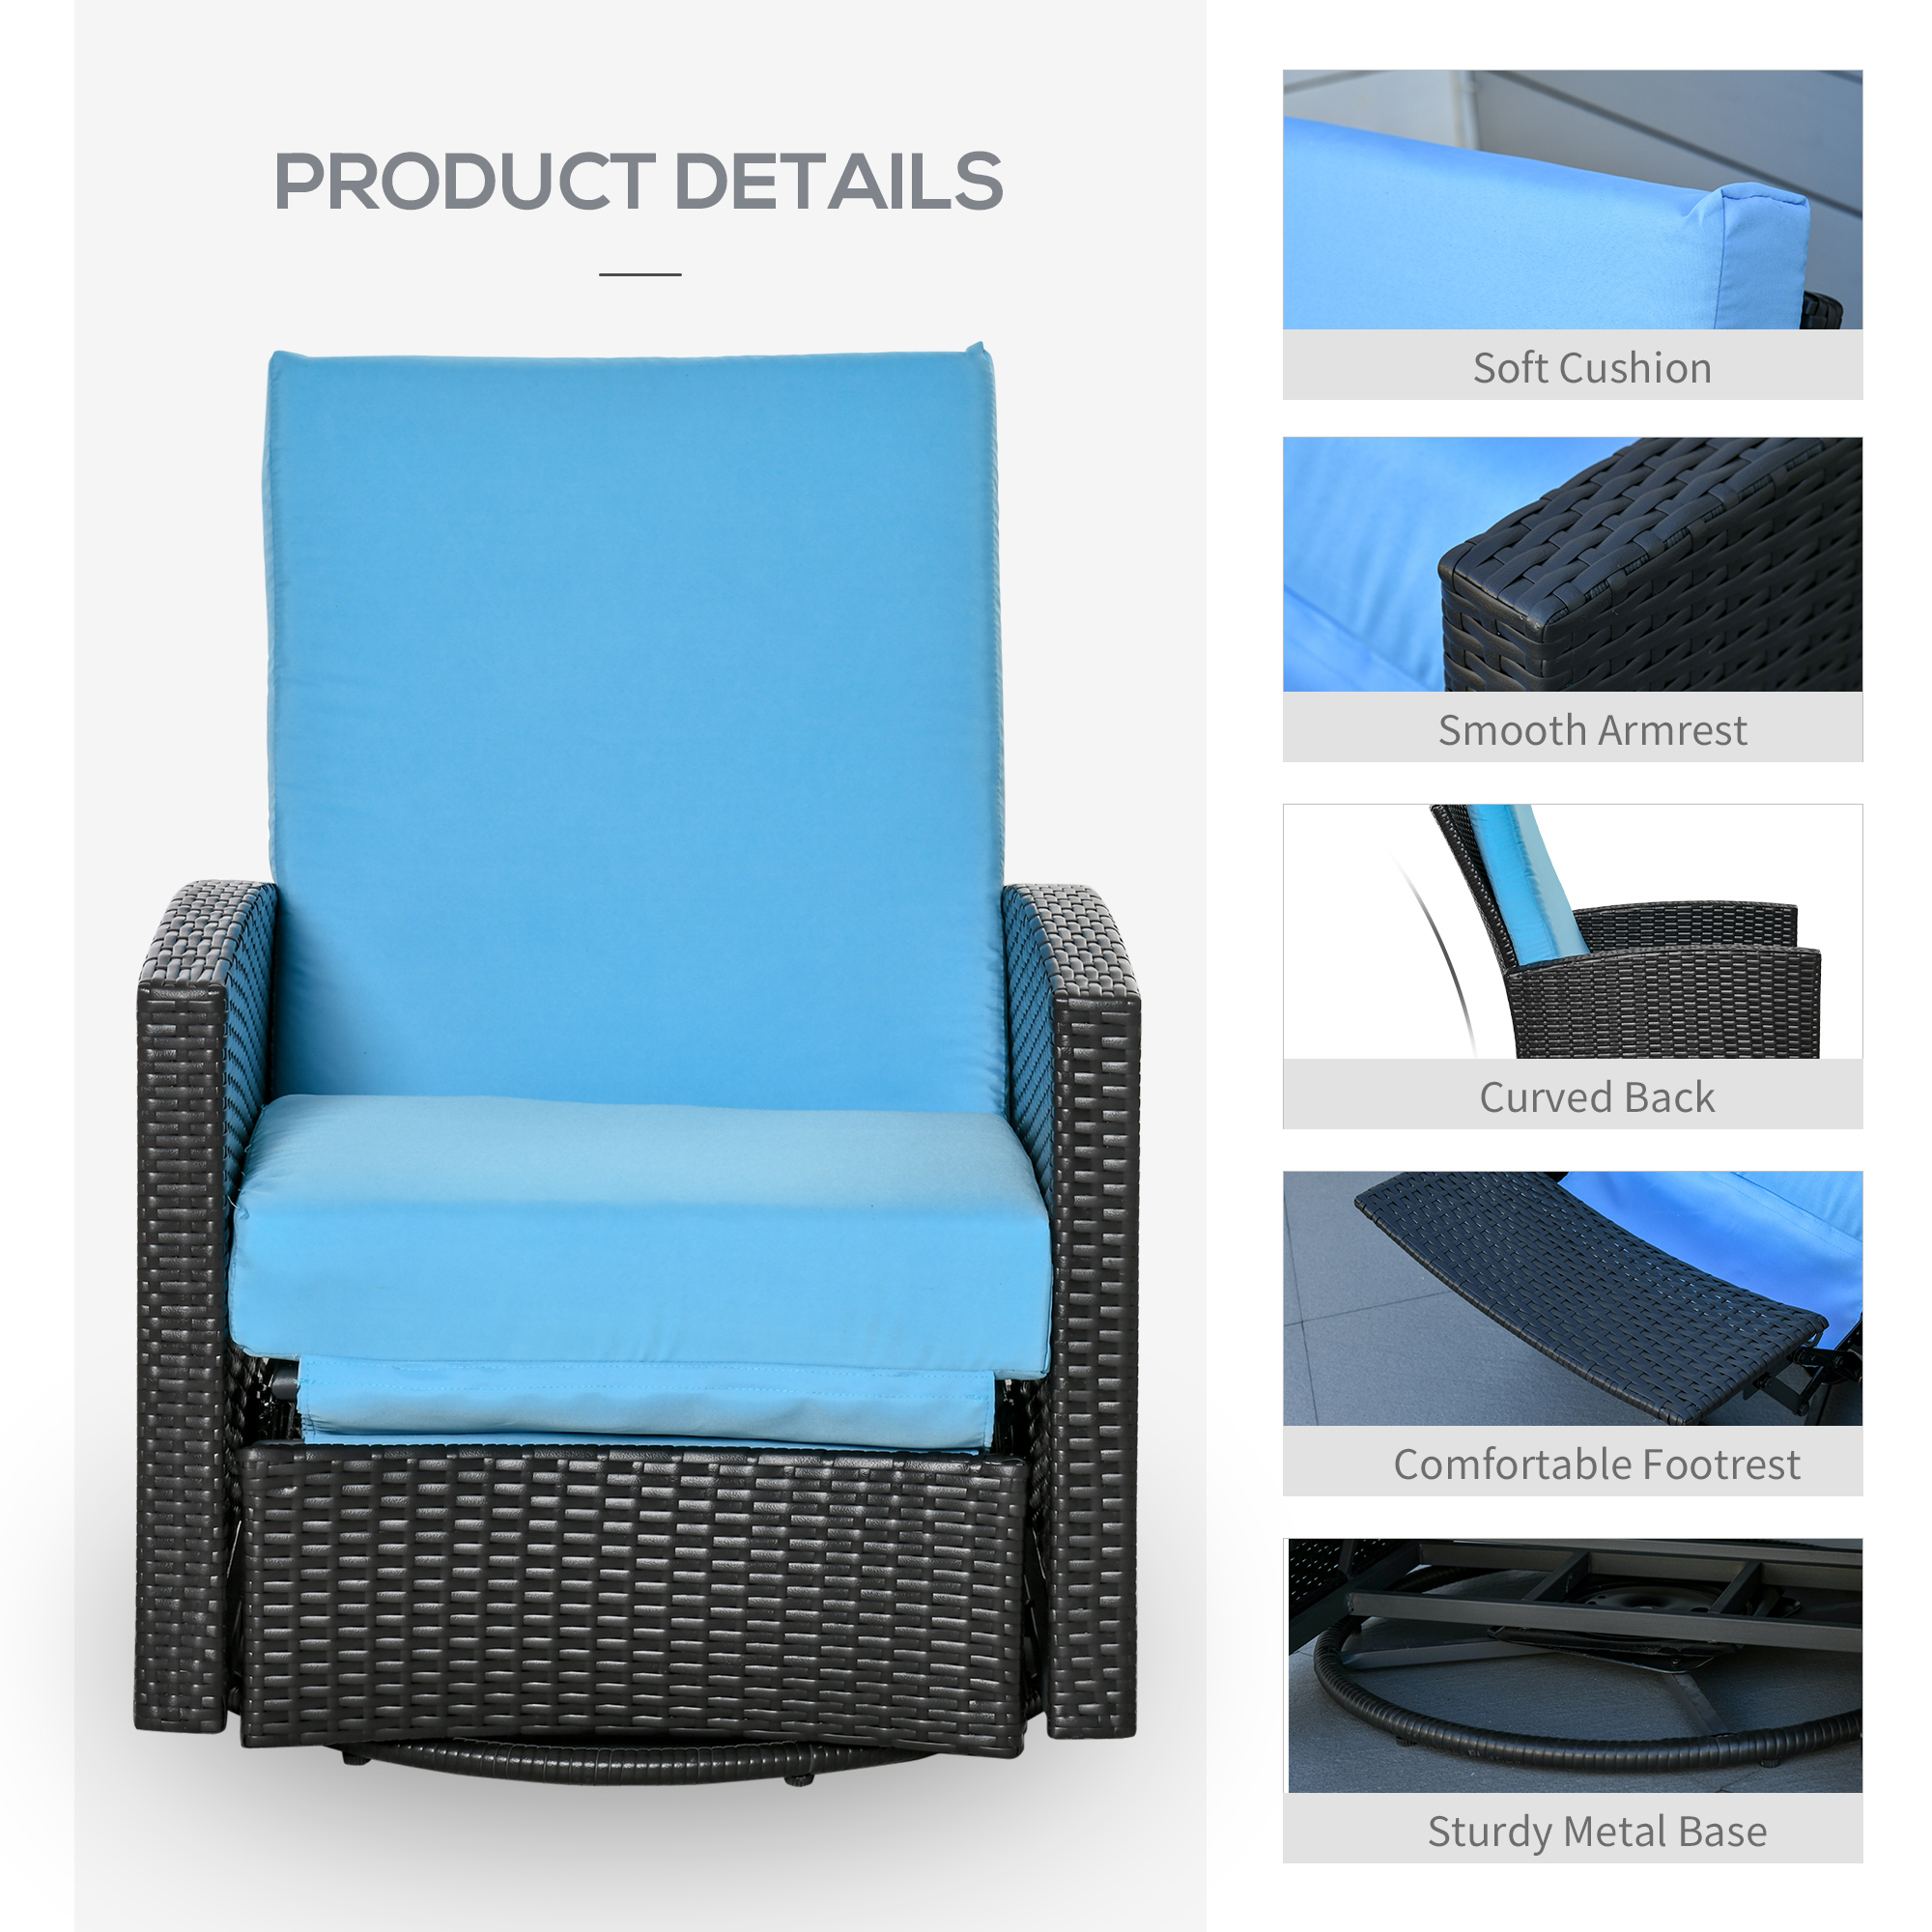 Outsunny Outdoor Wicker Swivel Recliner Chair, Reclining Backrest, Lifting Footrest, 360Â° Rotating Basic, Water Resistant Cushions for Patio, Light Blue - image 3 of 9